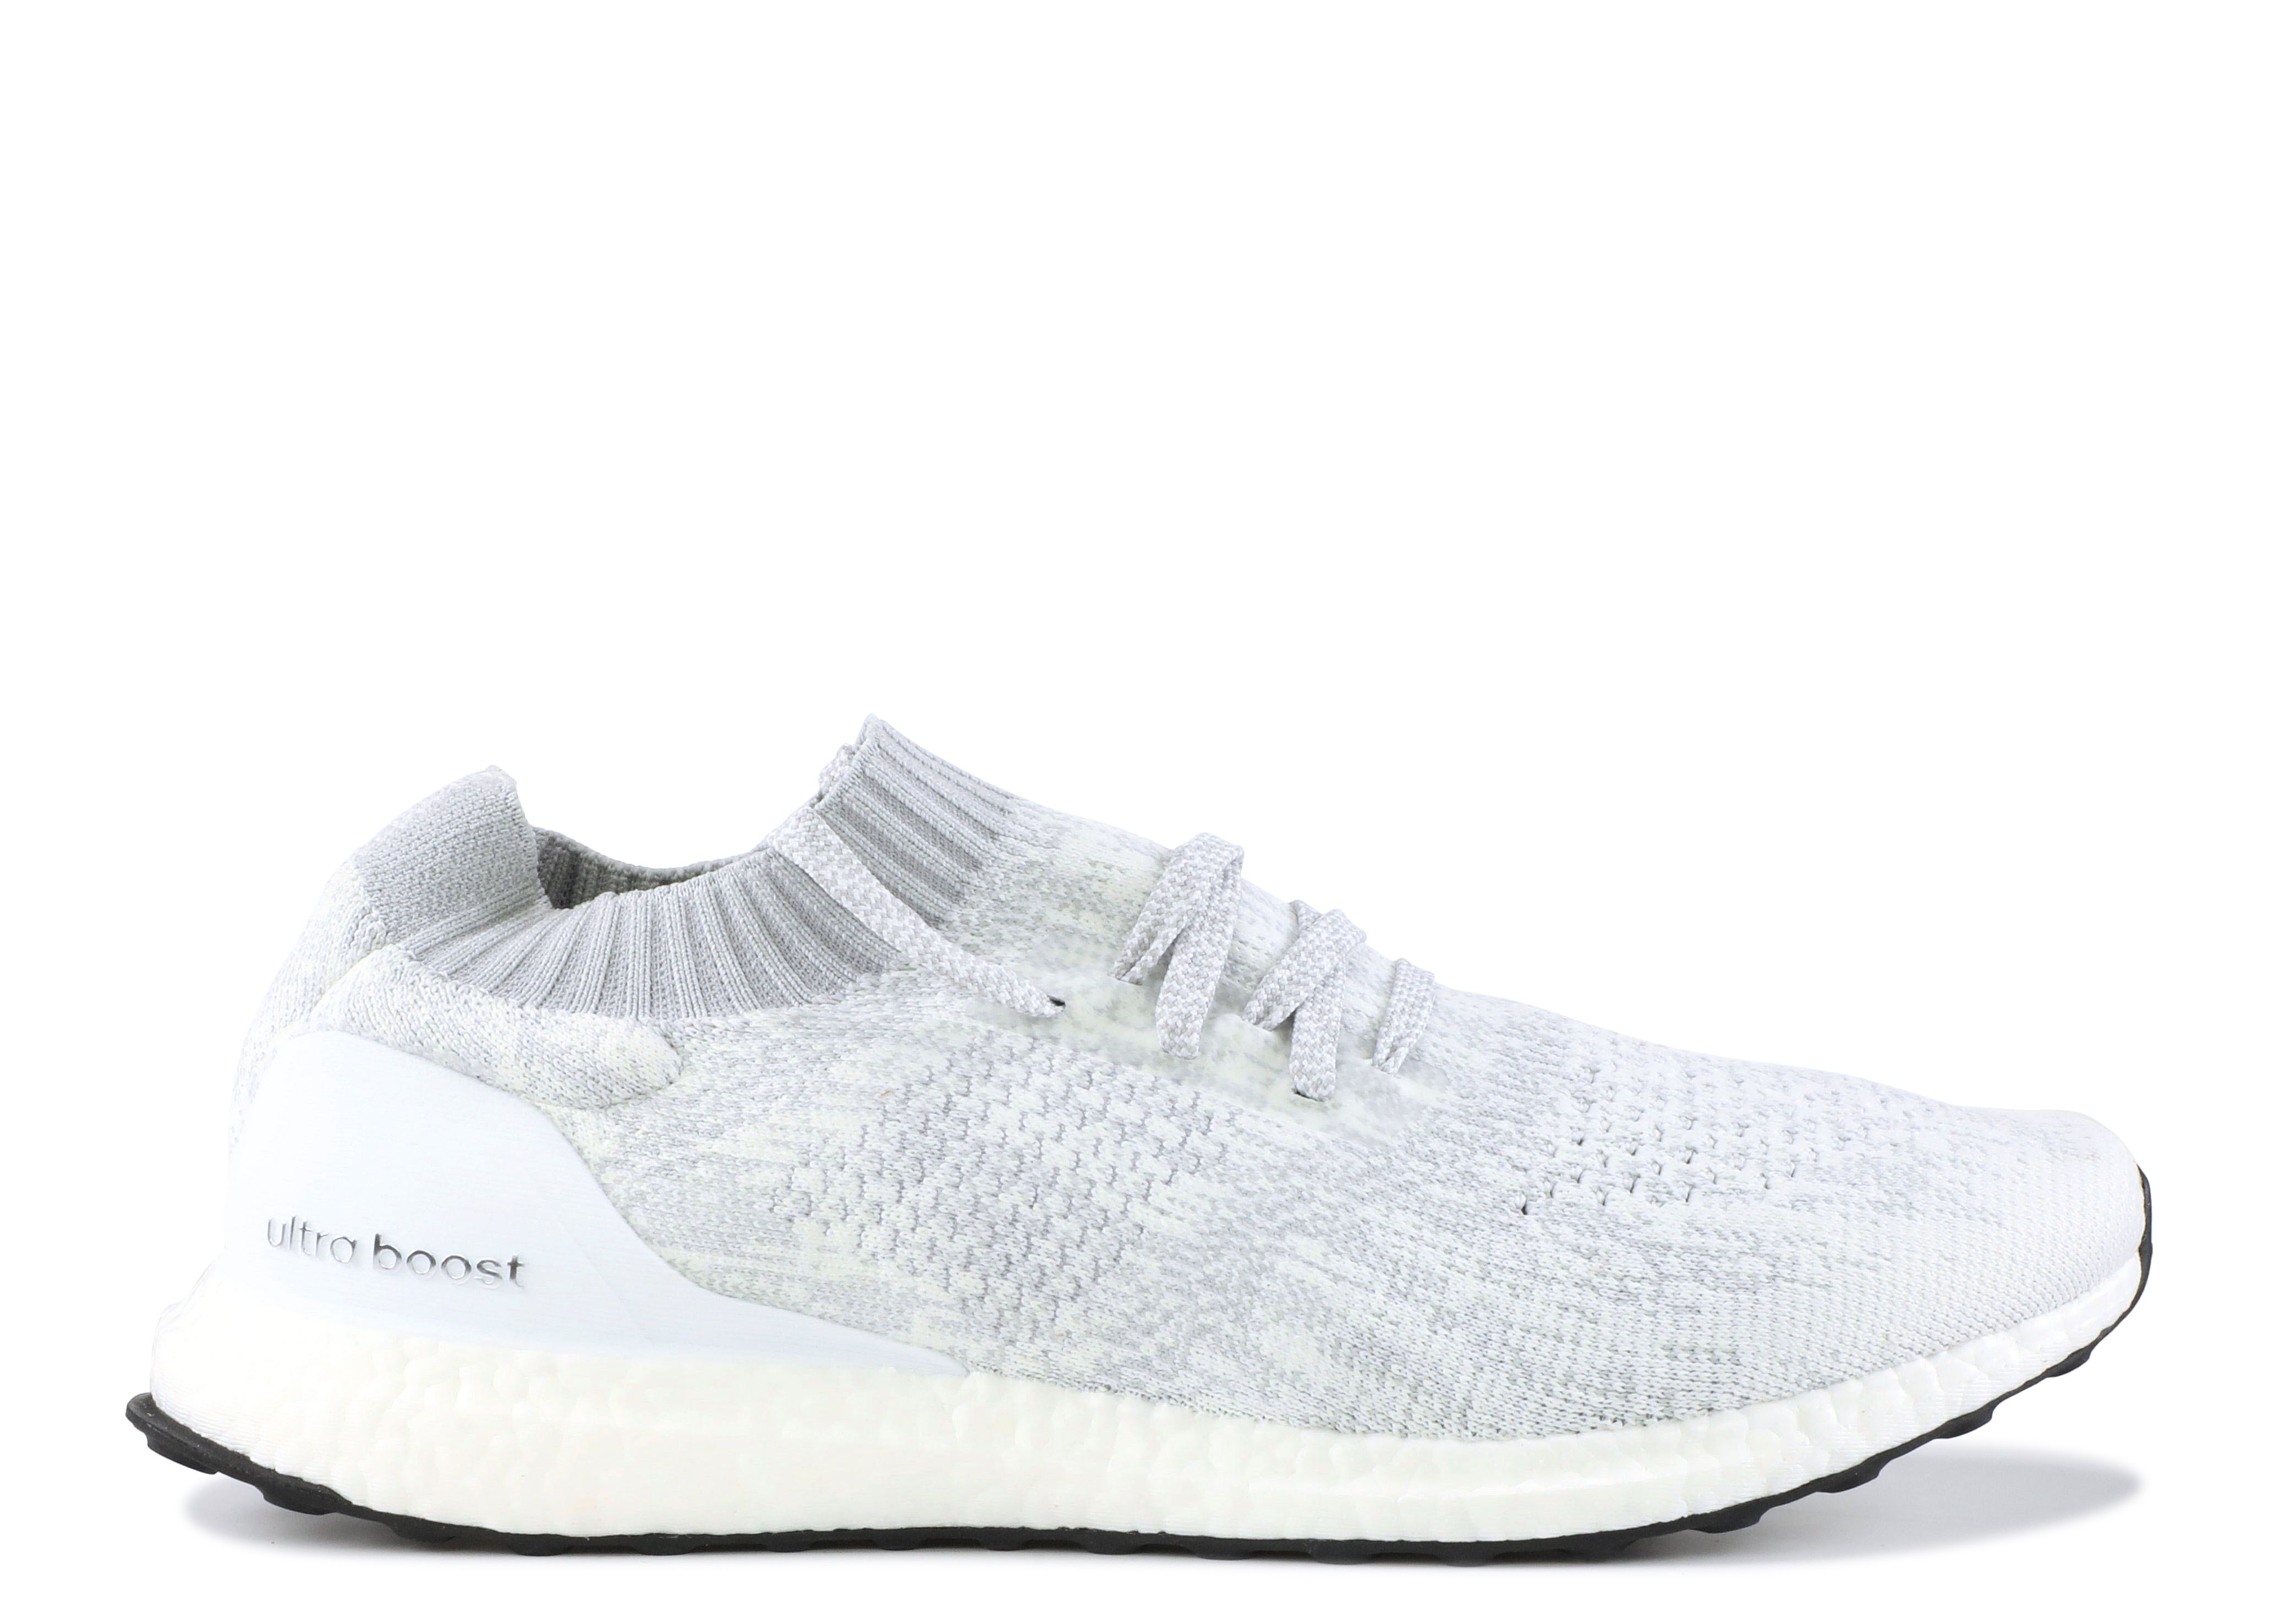 adidas boost uncaged white